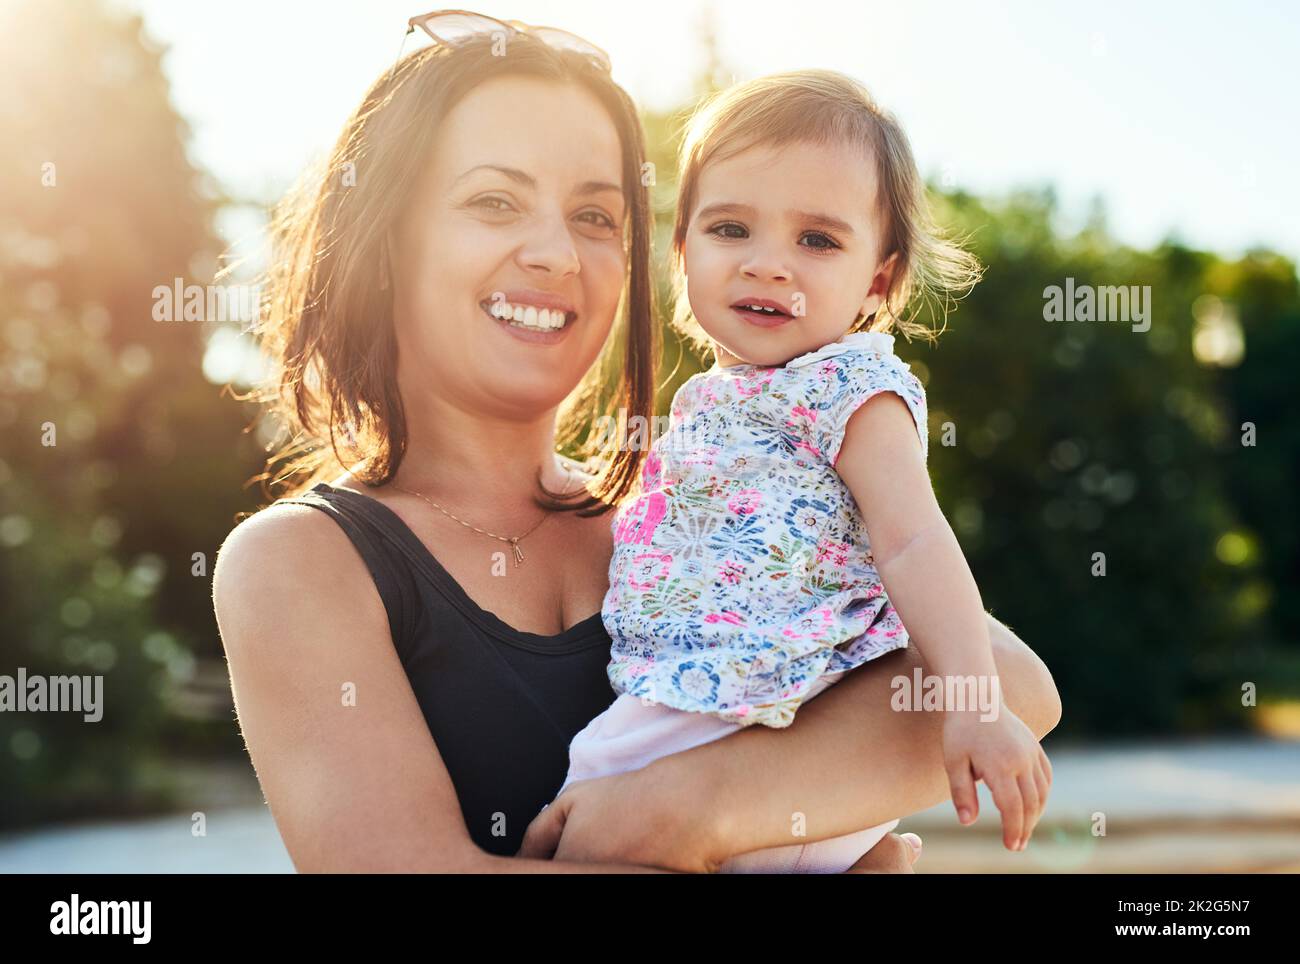 Mommys best friend. Shot of a young mother and her little girl outdoors. Stock Photo